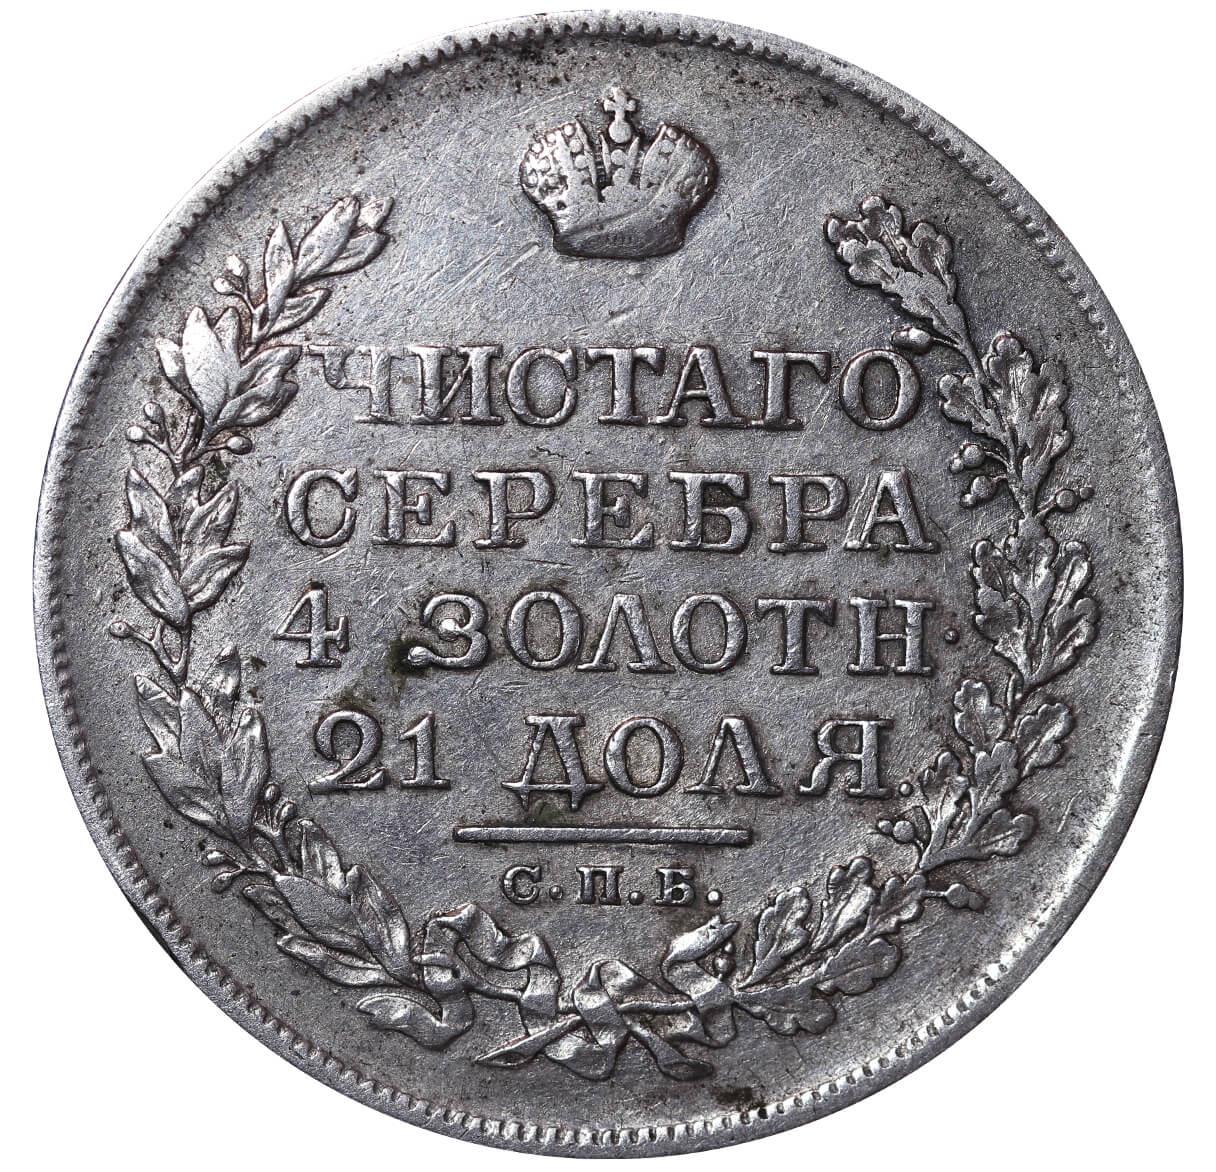 Russian Empire, 1 Rouble, 1820 year, SPB-PD - Image 2 of 3